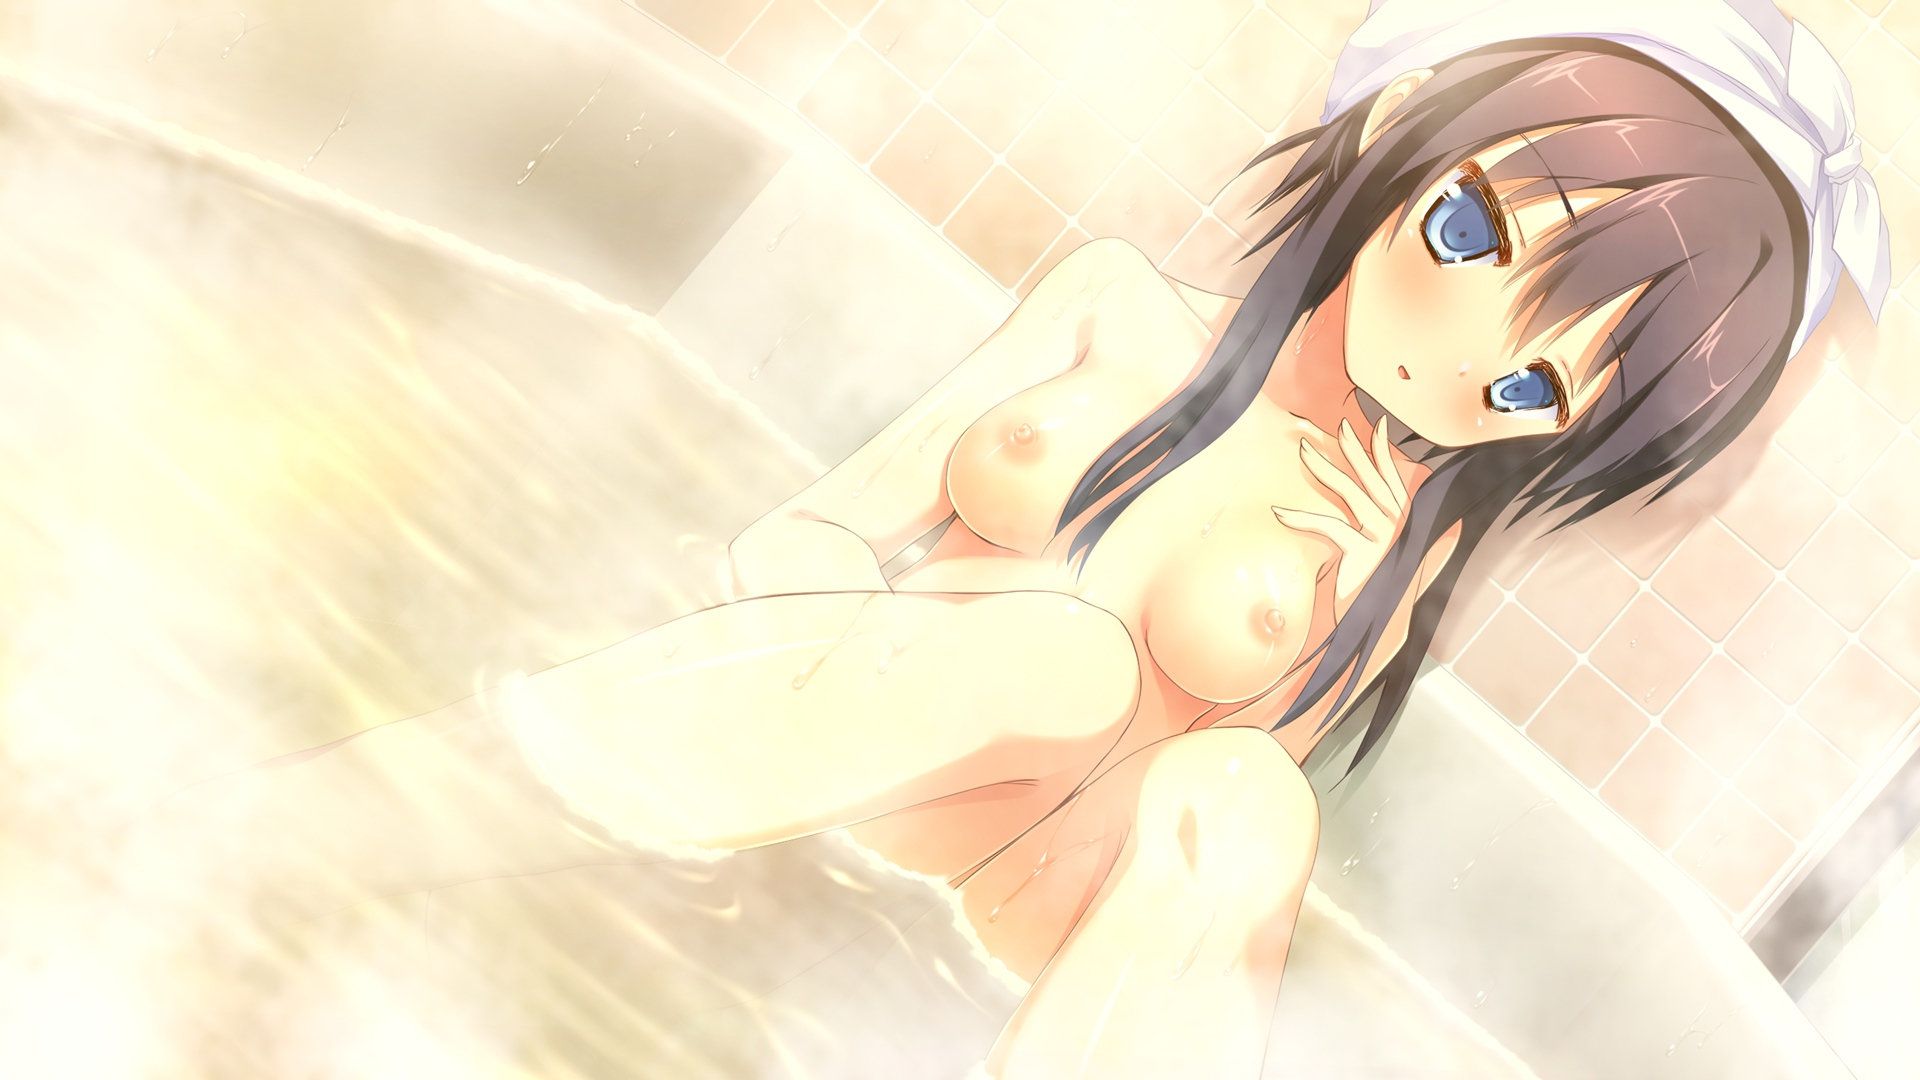 Bath image that you want to be lewd in the bubble covered 3